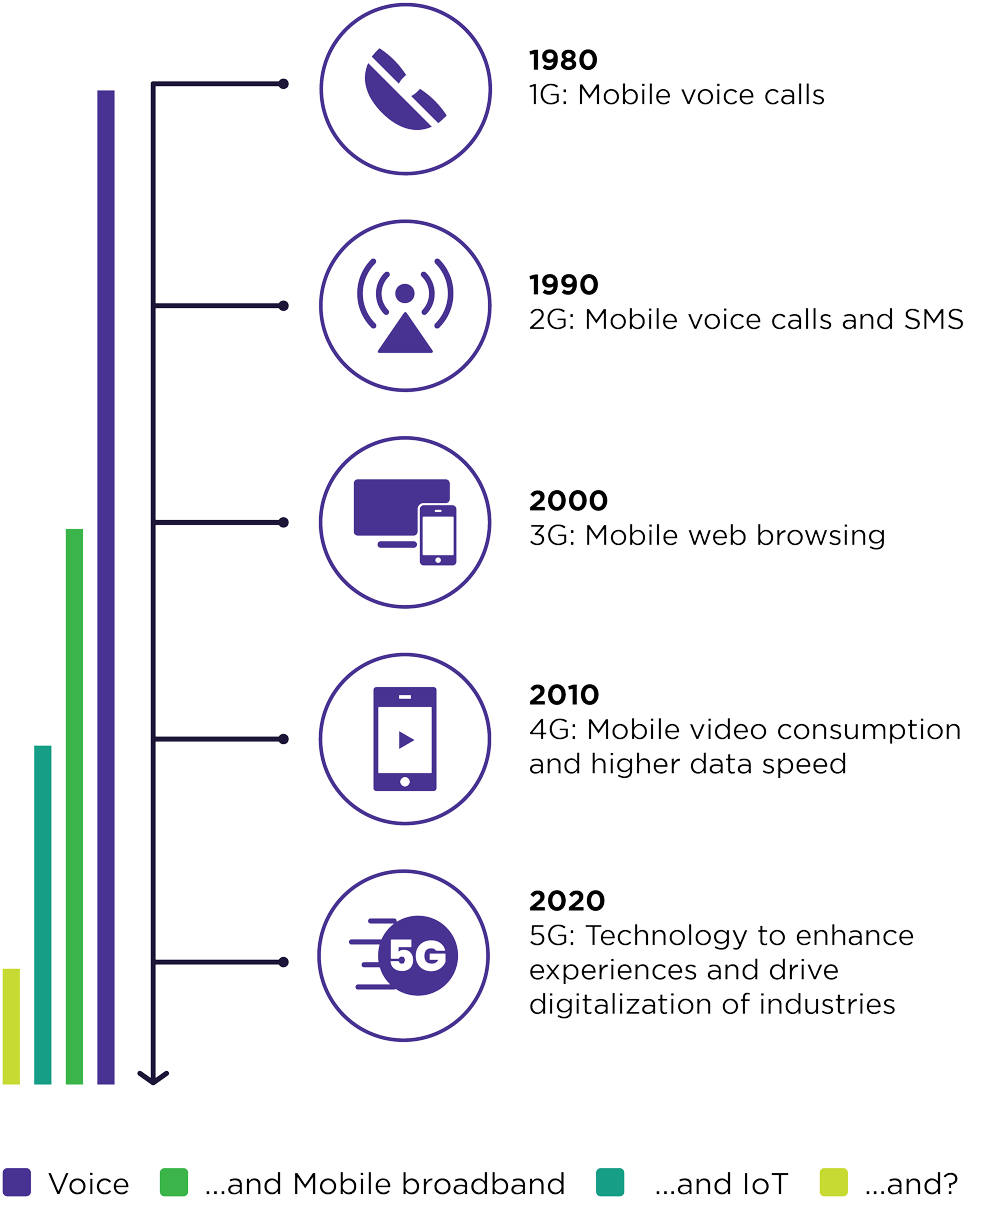 Infographic showing timeline of mobile technology generations - 1G through 5G.